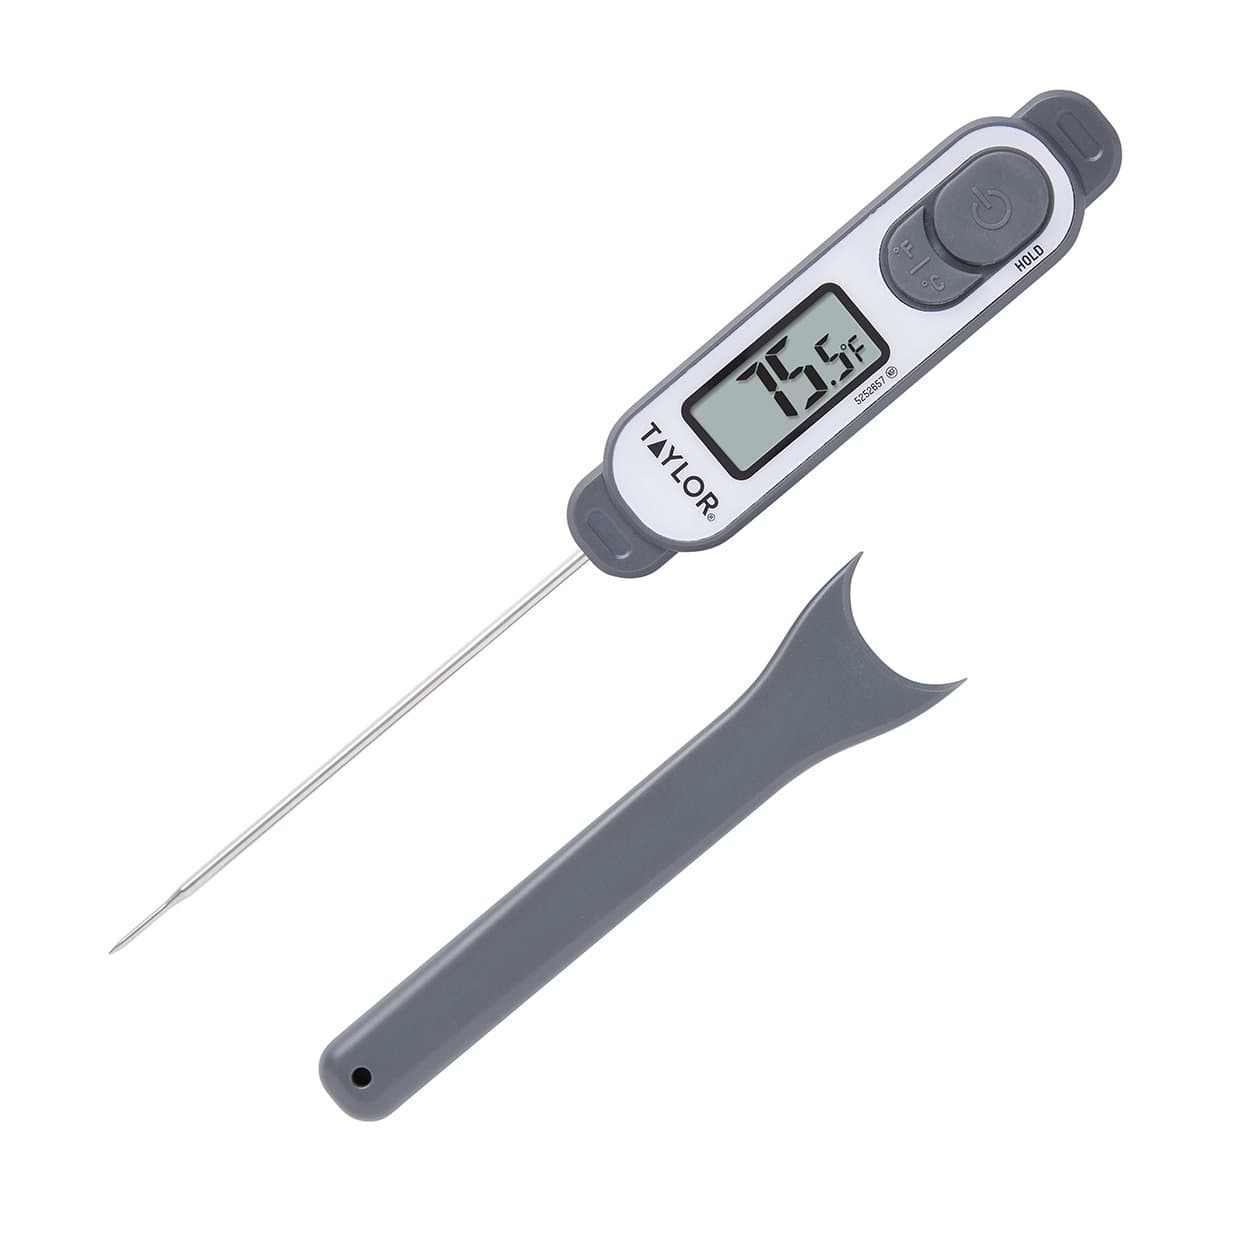 Taylor 9867FDA Digital Pocket Thermocouple Thermometer with